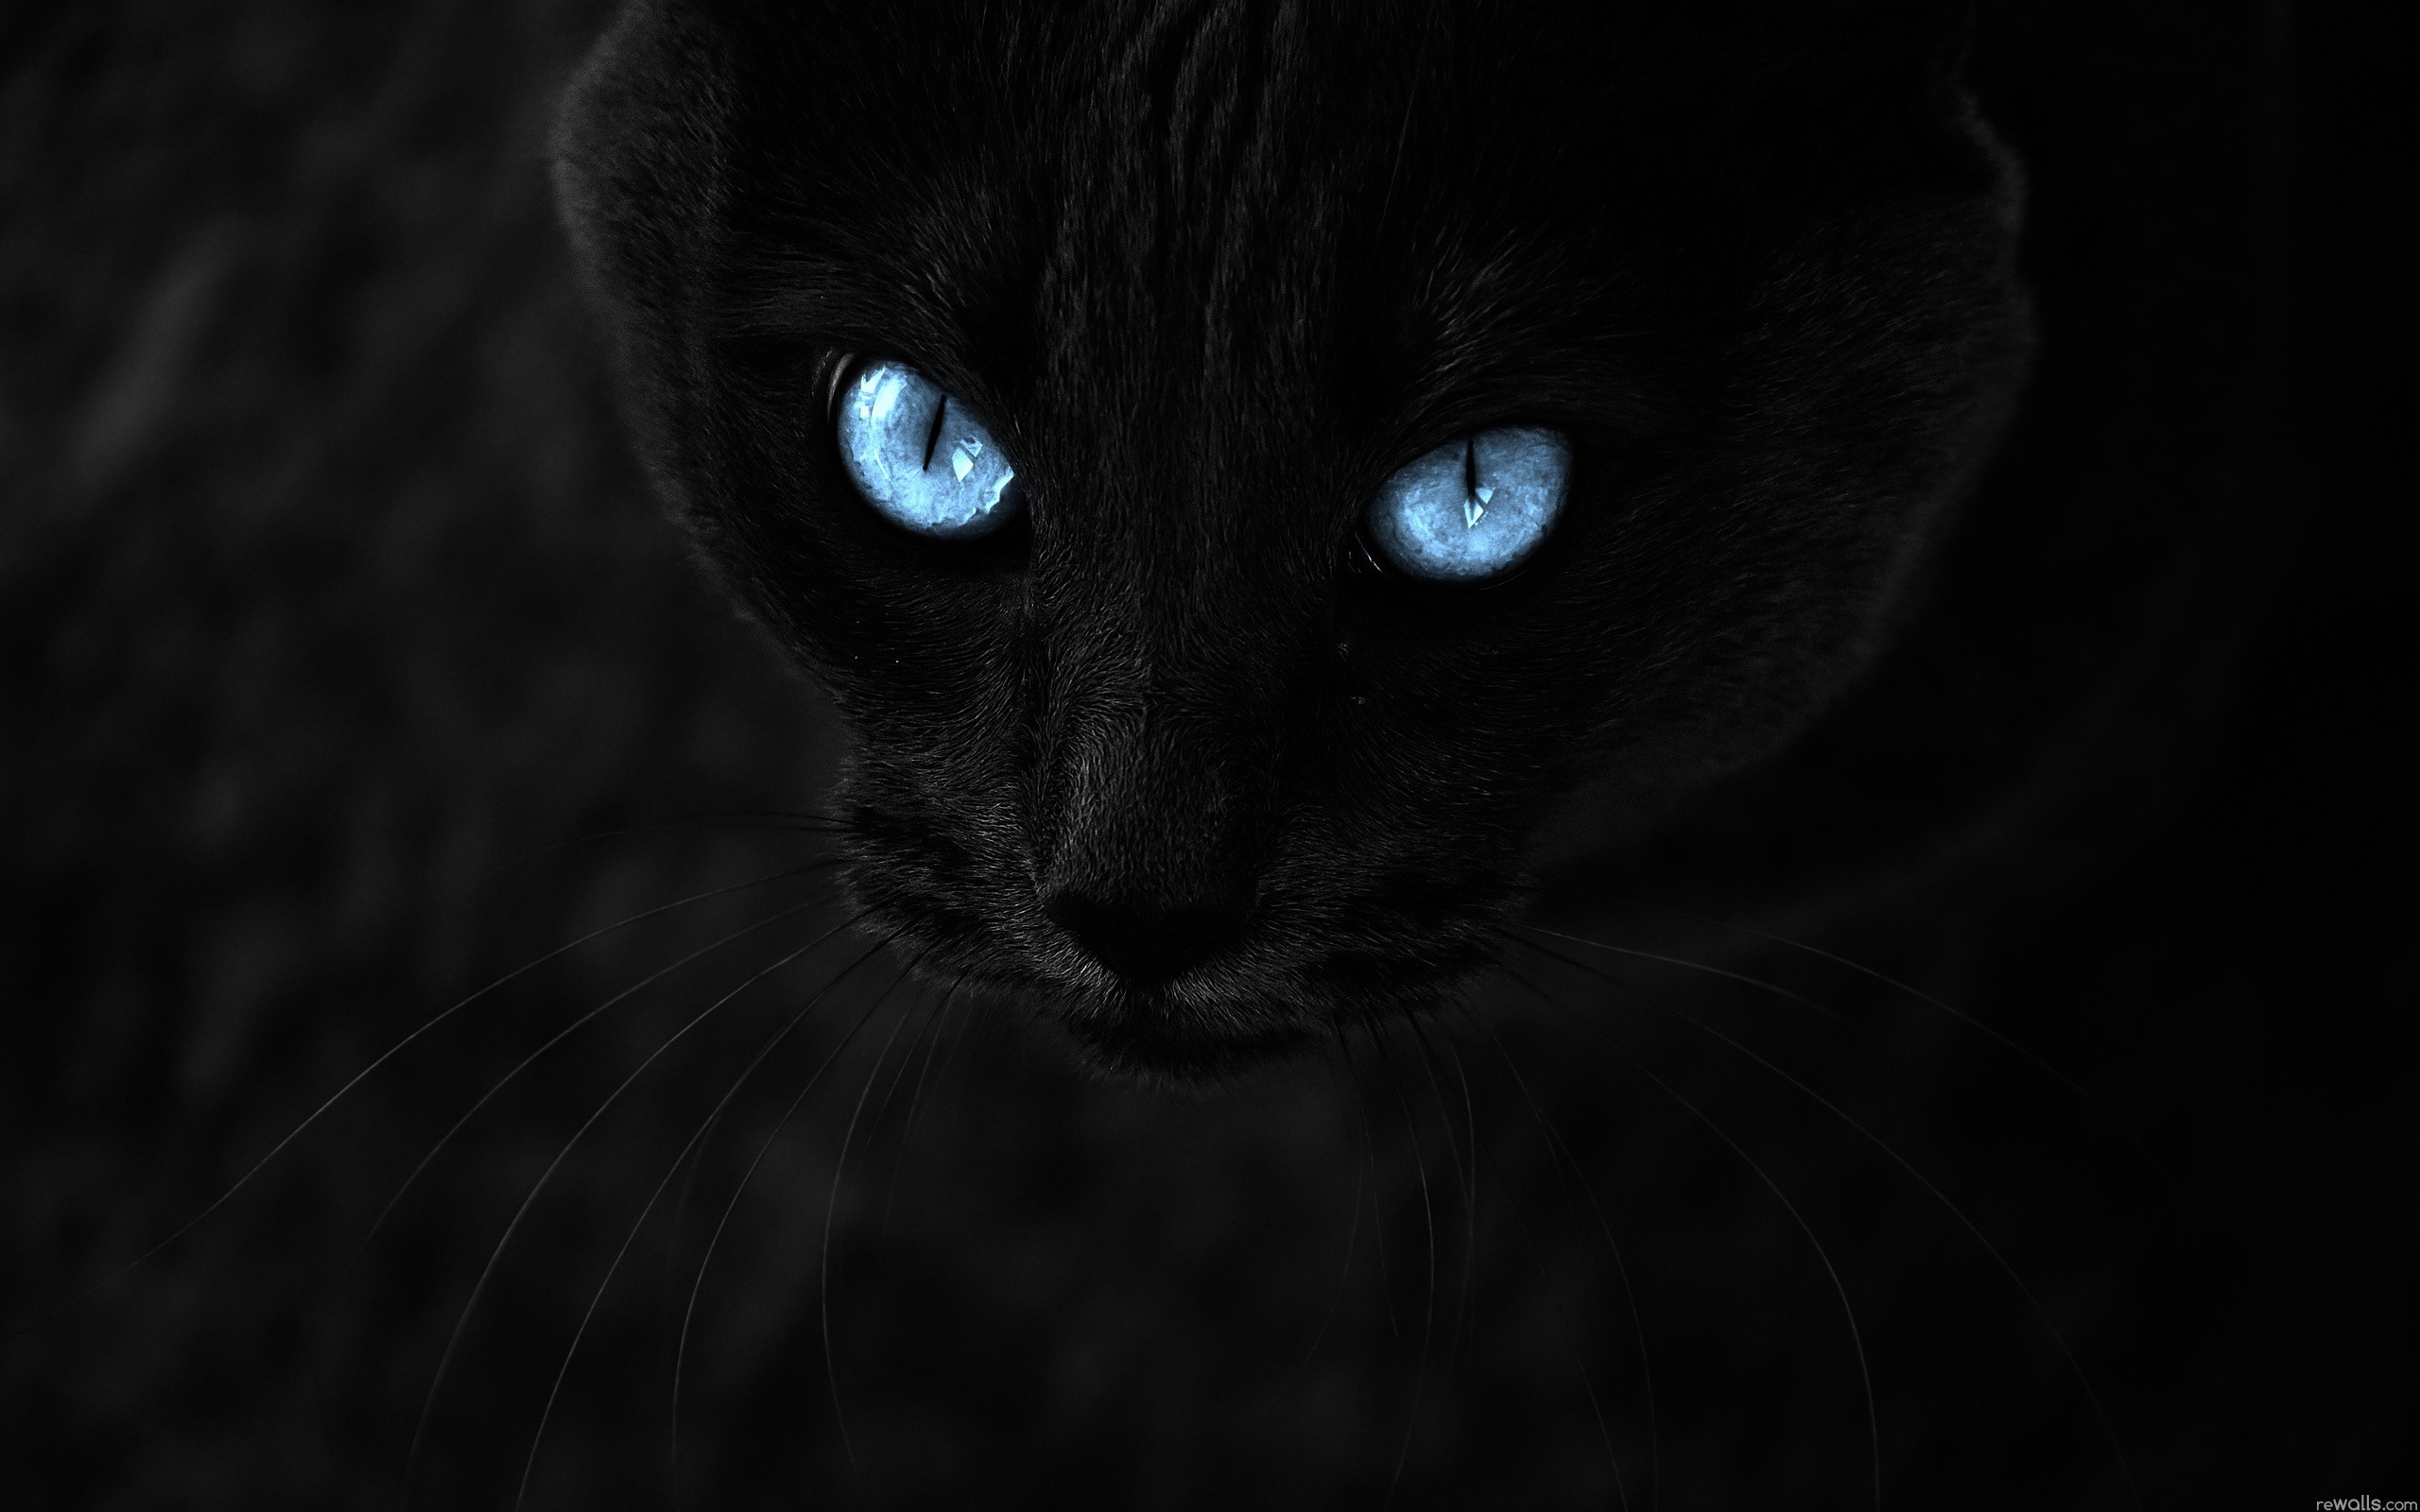 General 2560x1600 black cats cats blue eyes closeup low light watermarked